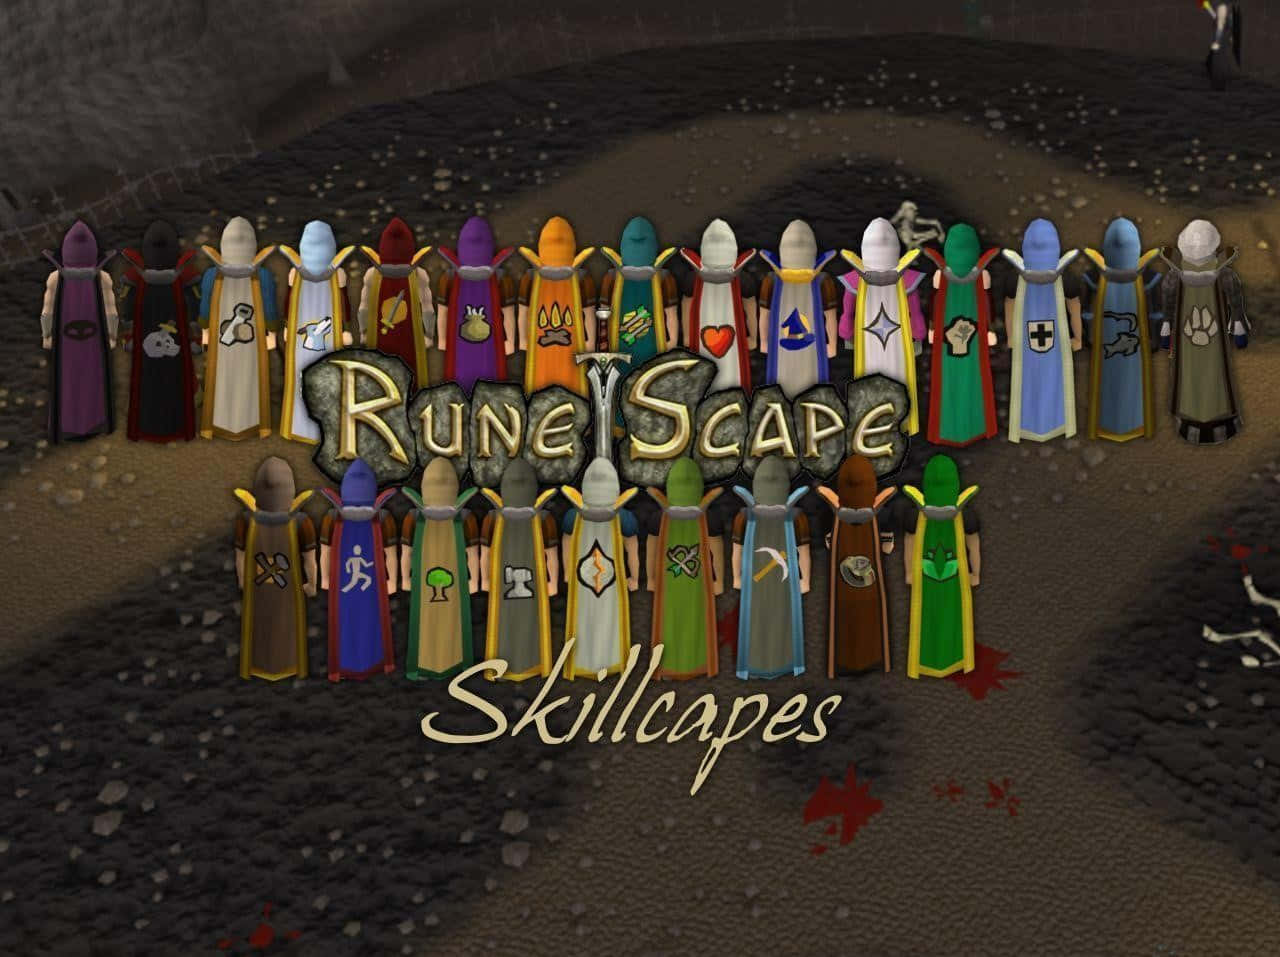 A Retro Game From The 90s - HD Runescape Oldschool